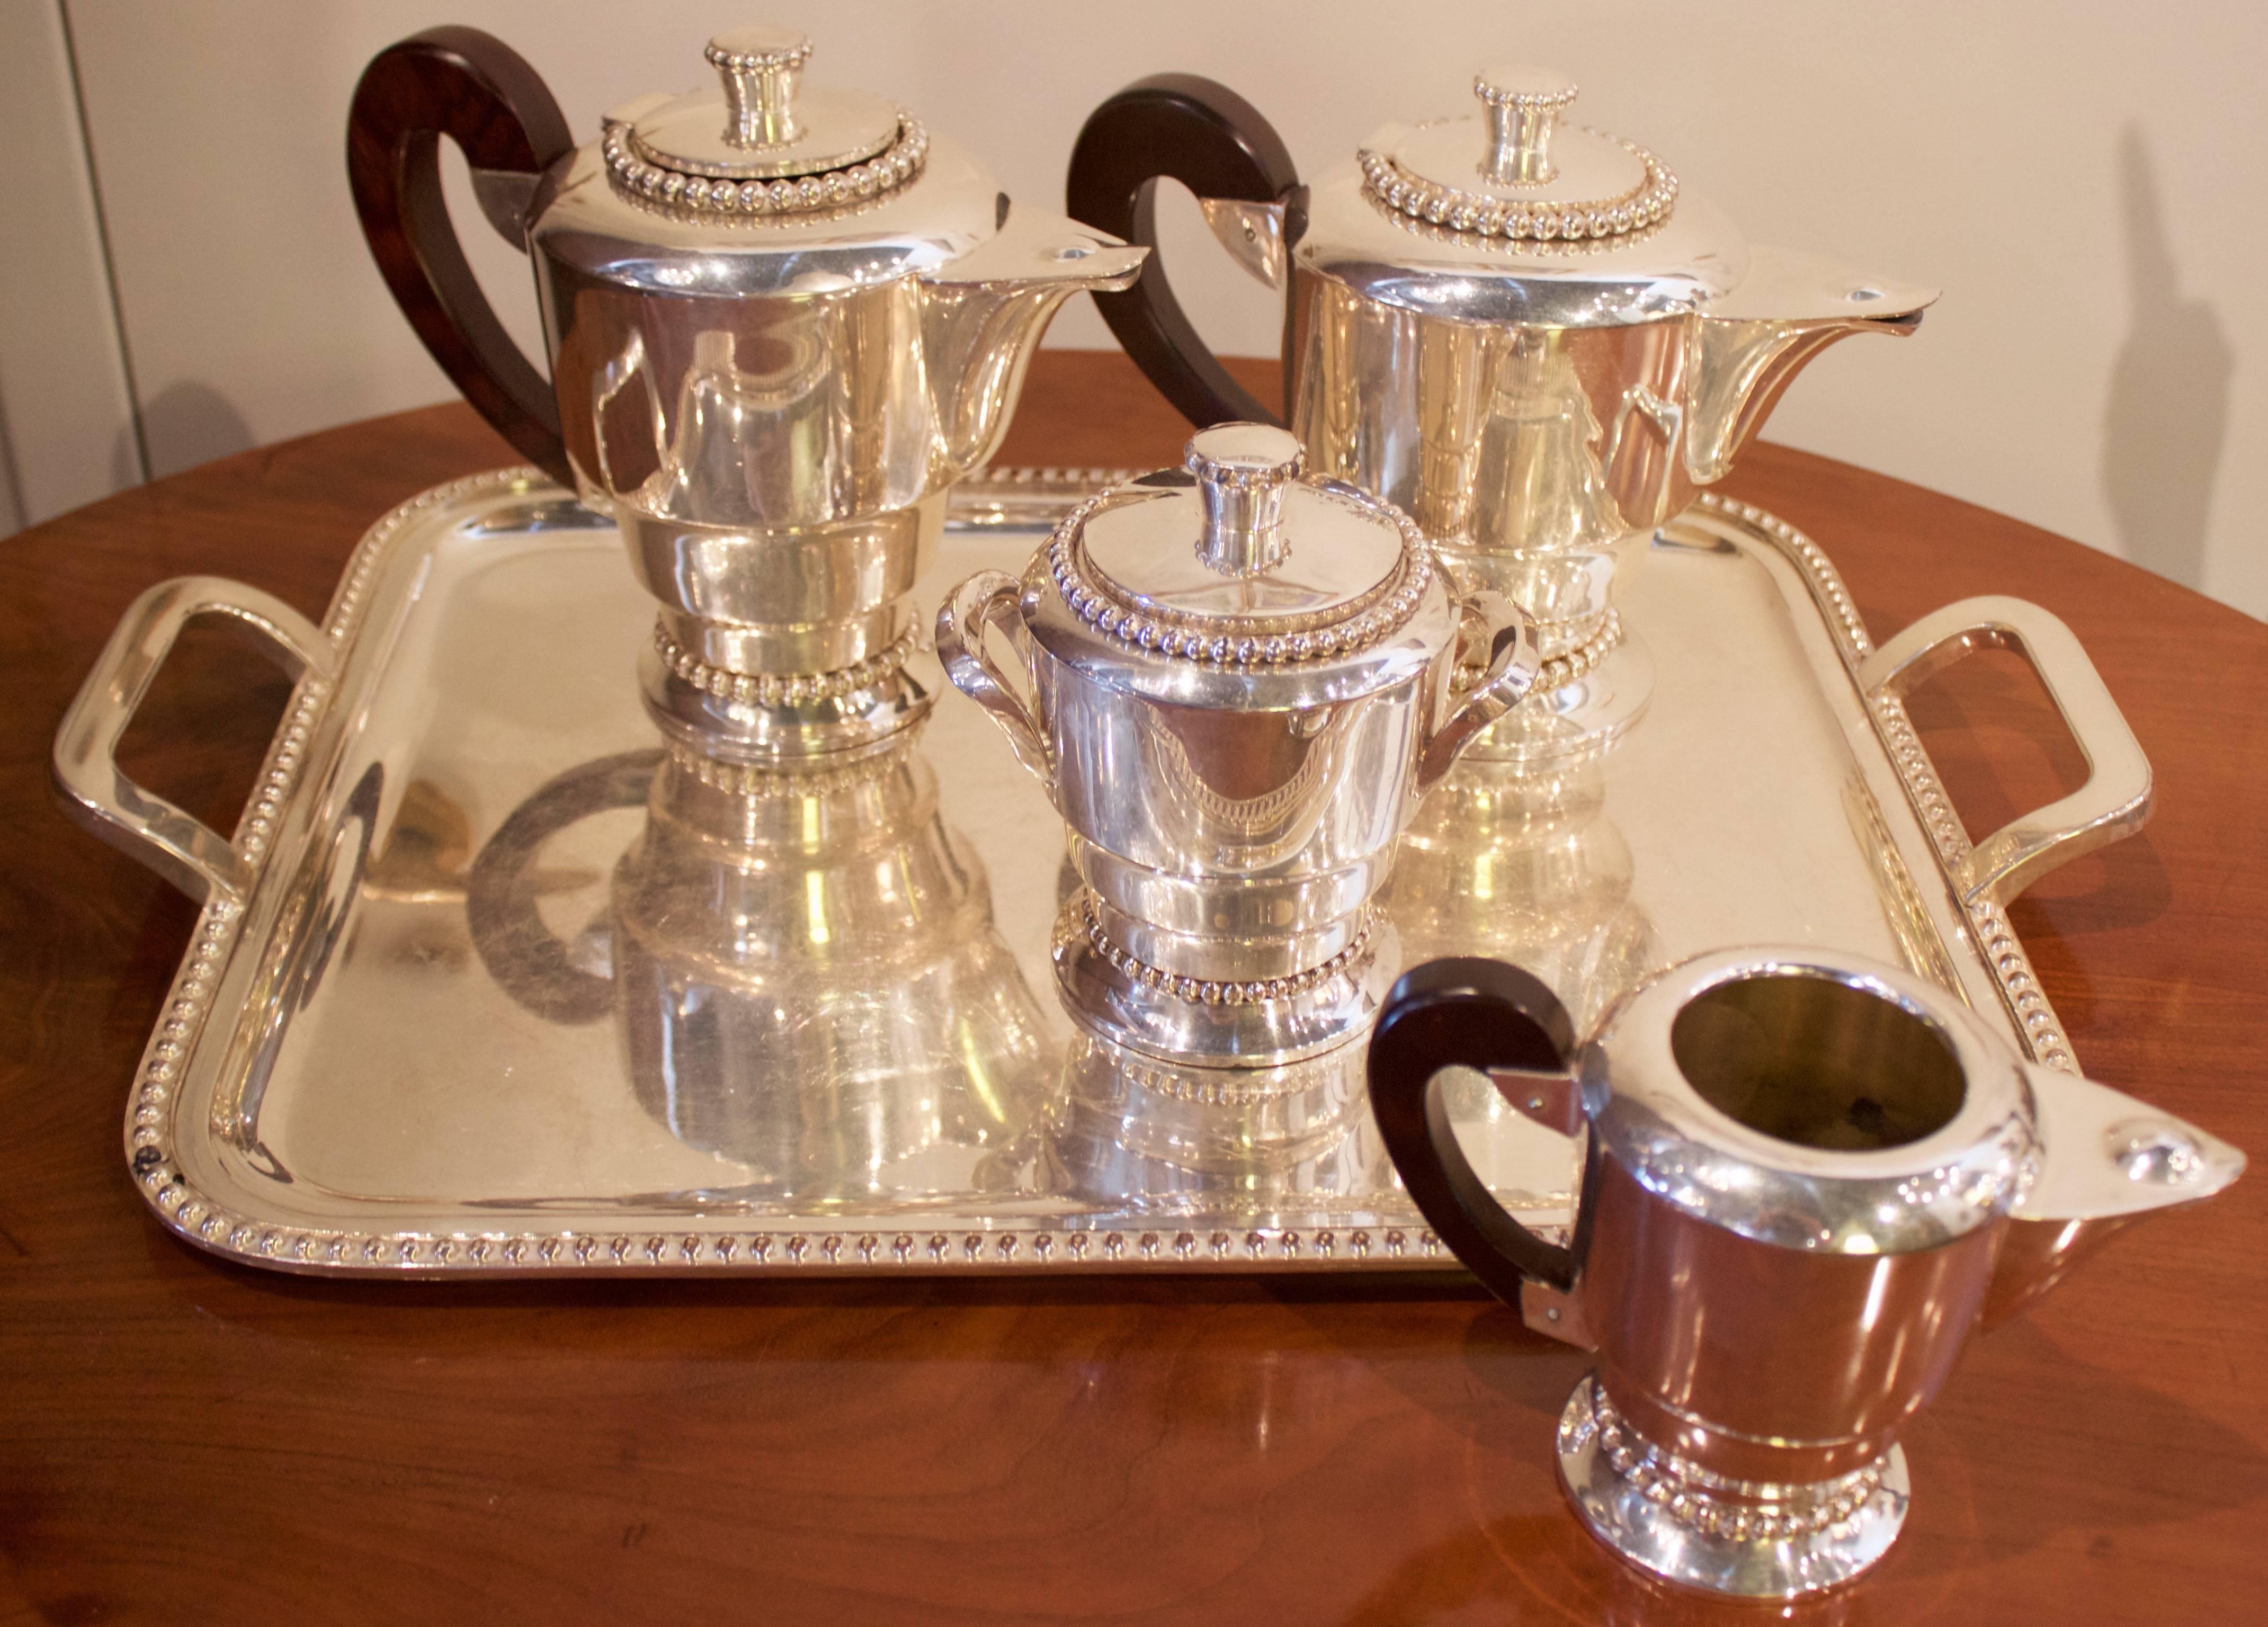 Elegant Art Deco set in Jean Despree Style. Includes teapot, coffee pot, sugar bowl, milk jug and its original tray. Gorgeous wood handles.
Each piece shows a Maker's mark which here is a 